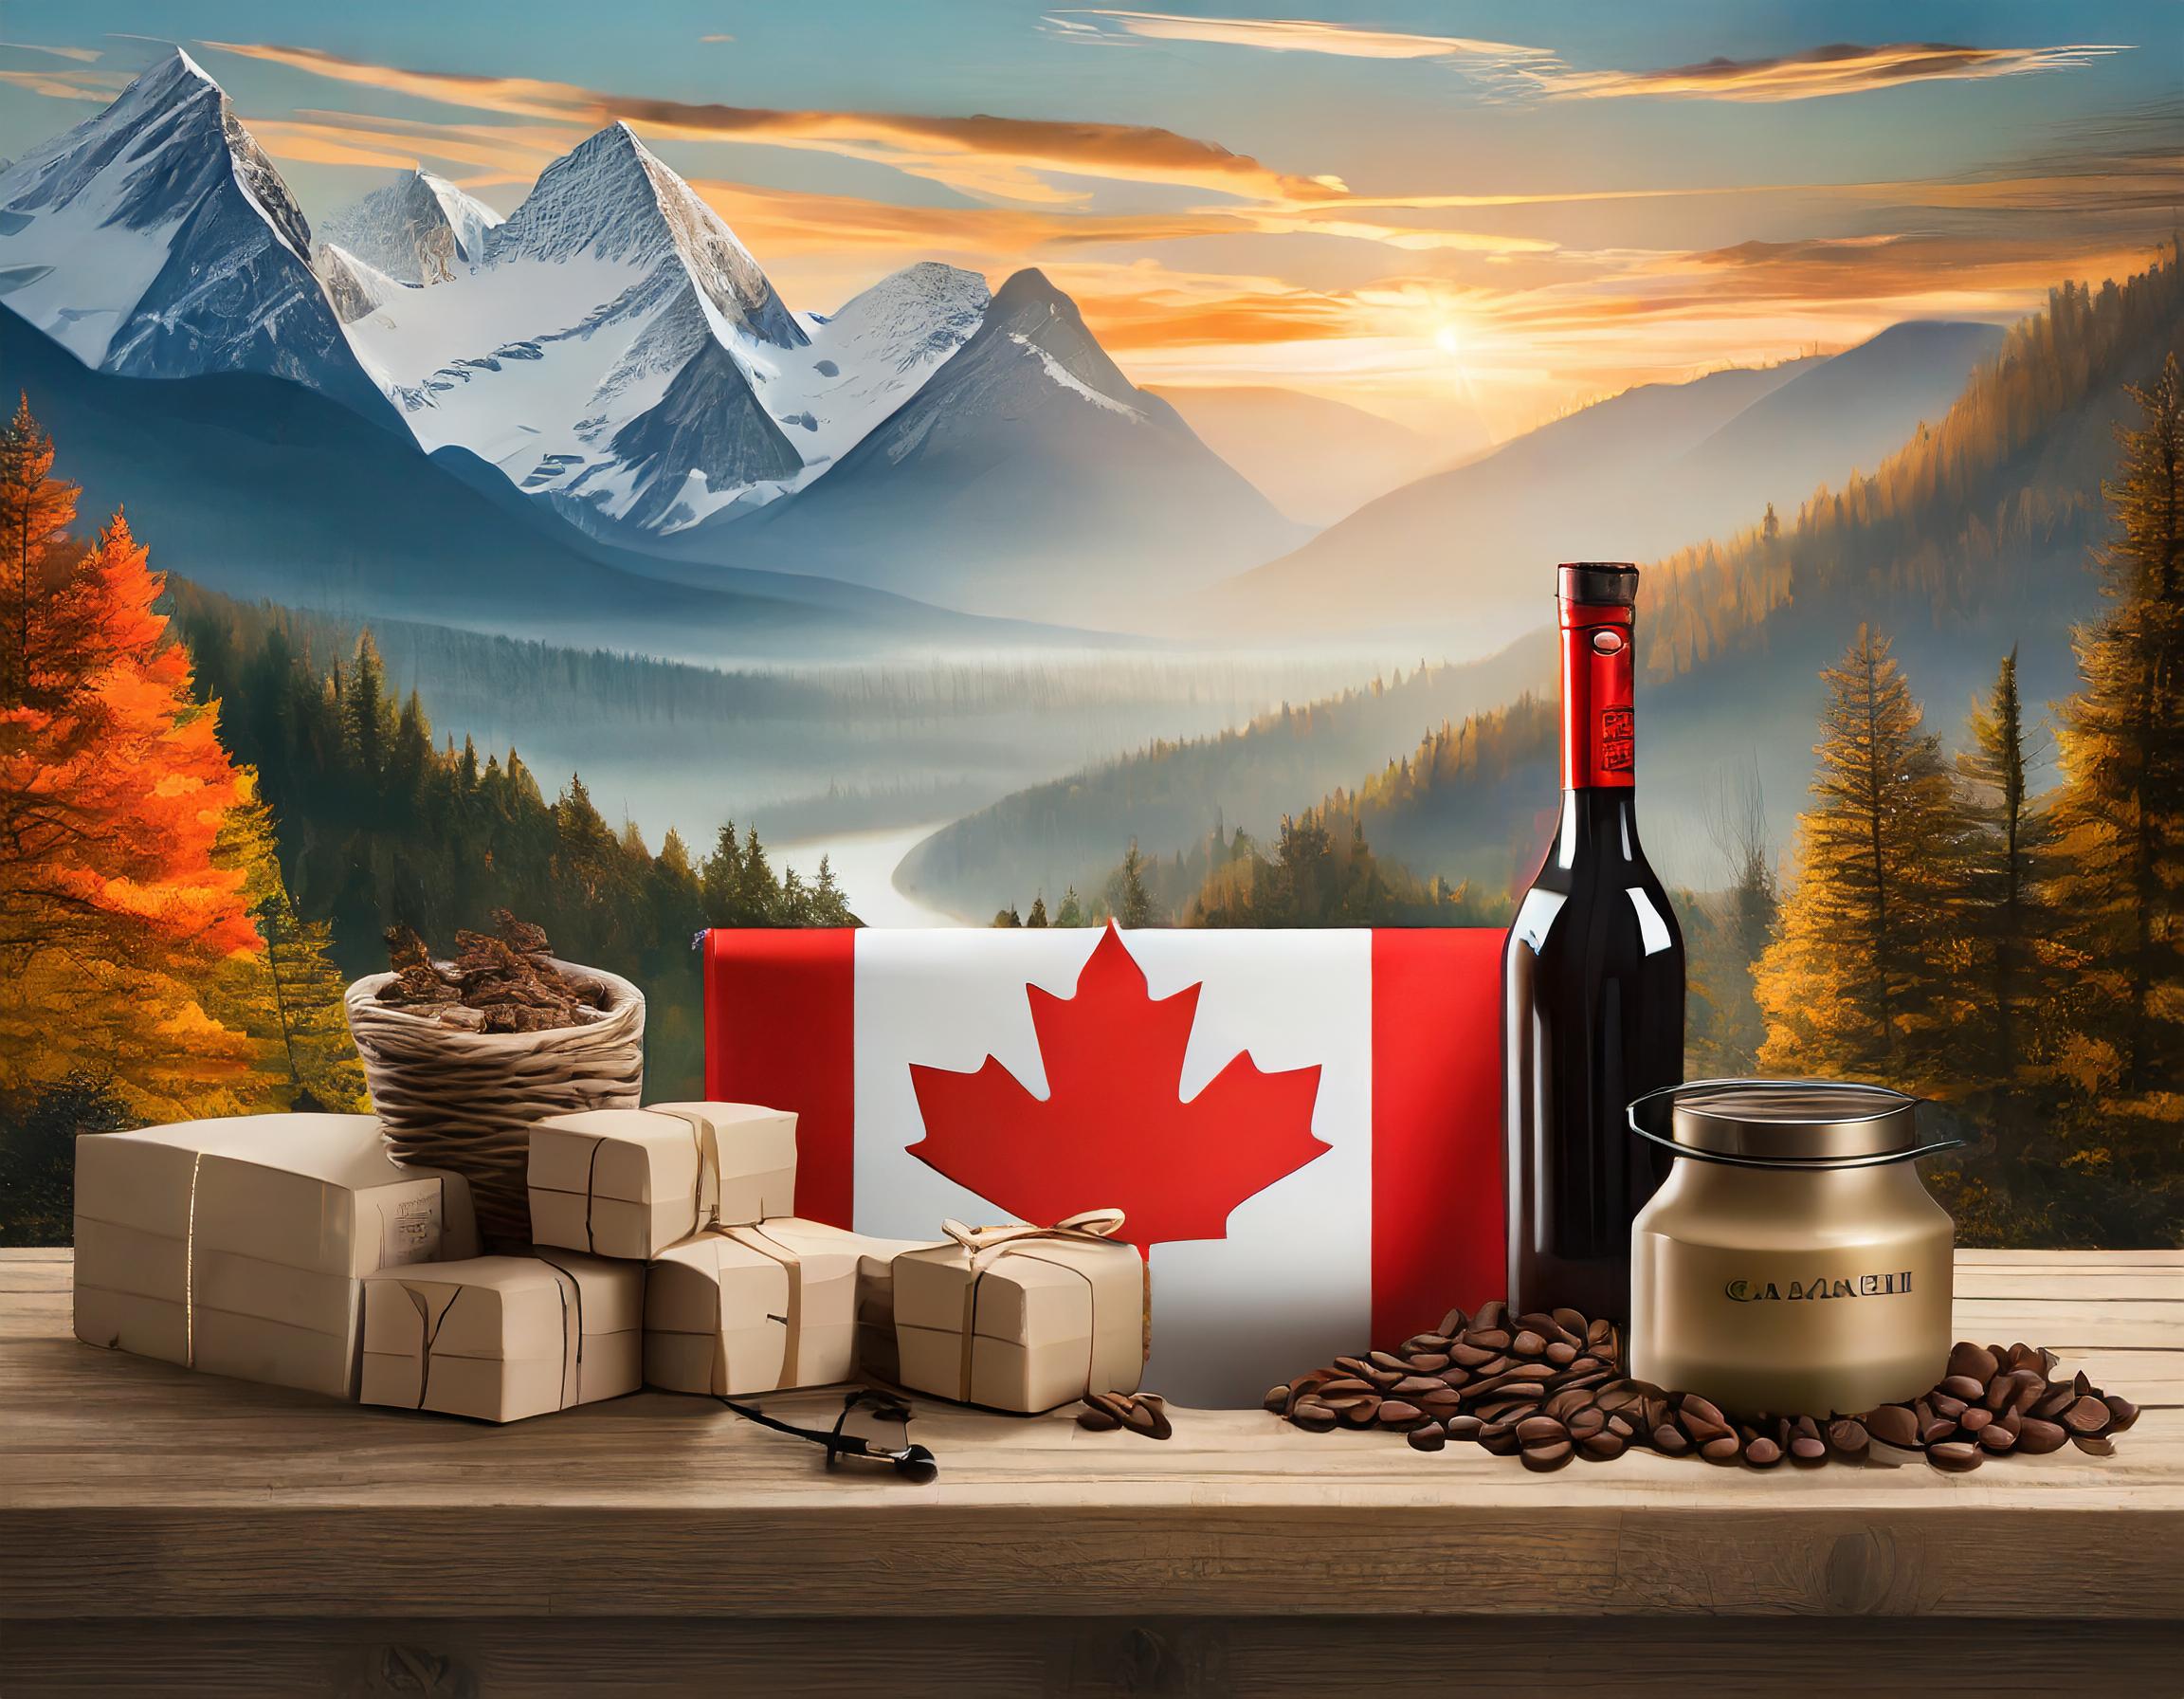 A collage of items representing the top 10 must-have products to ship to Canada from overseas, including maple syrup, coffee, outdoor gear, tech gadgets, and more, with the Canadian flag in the background.